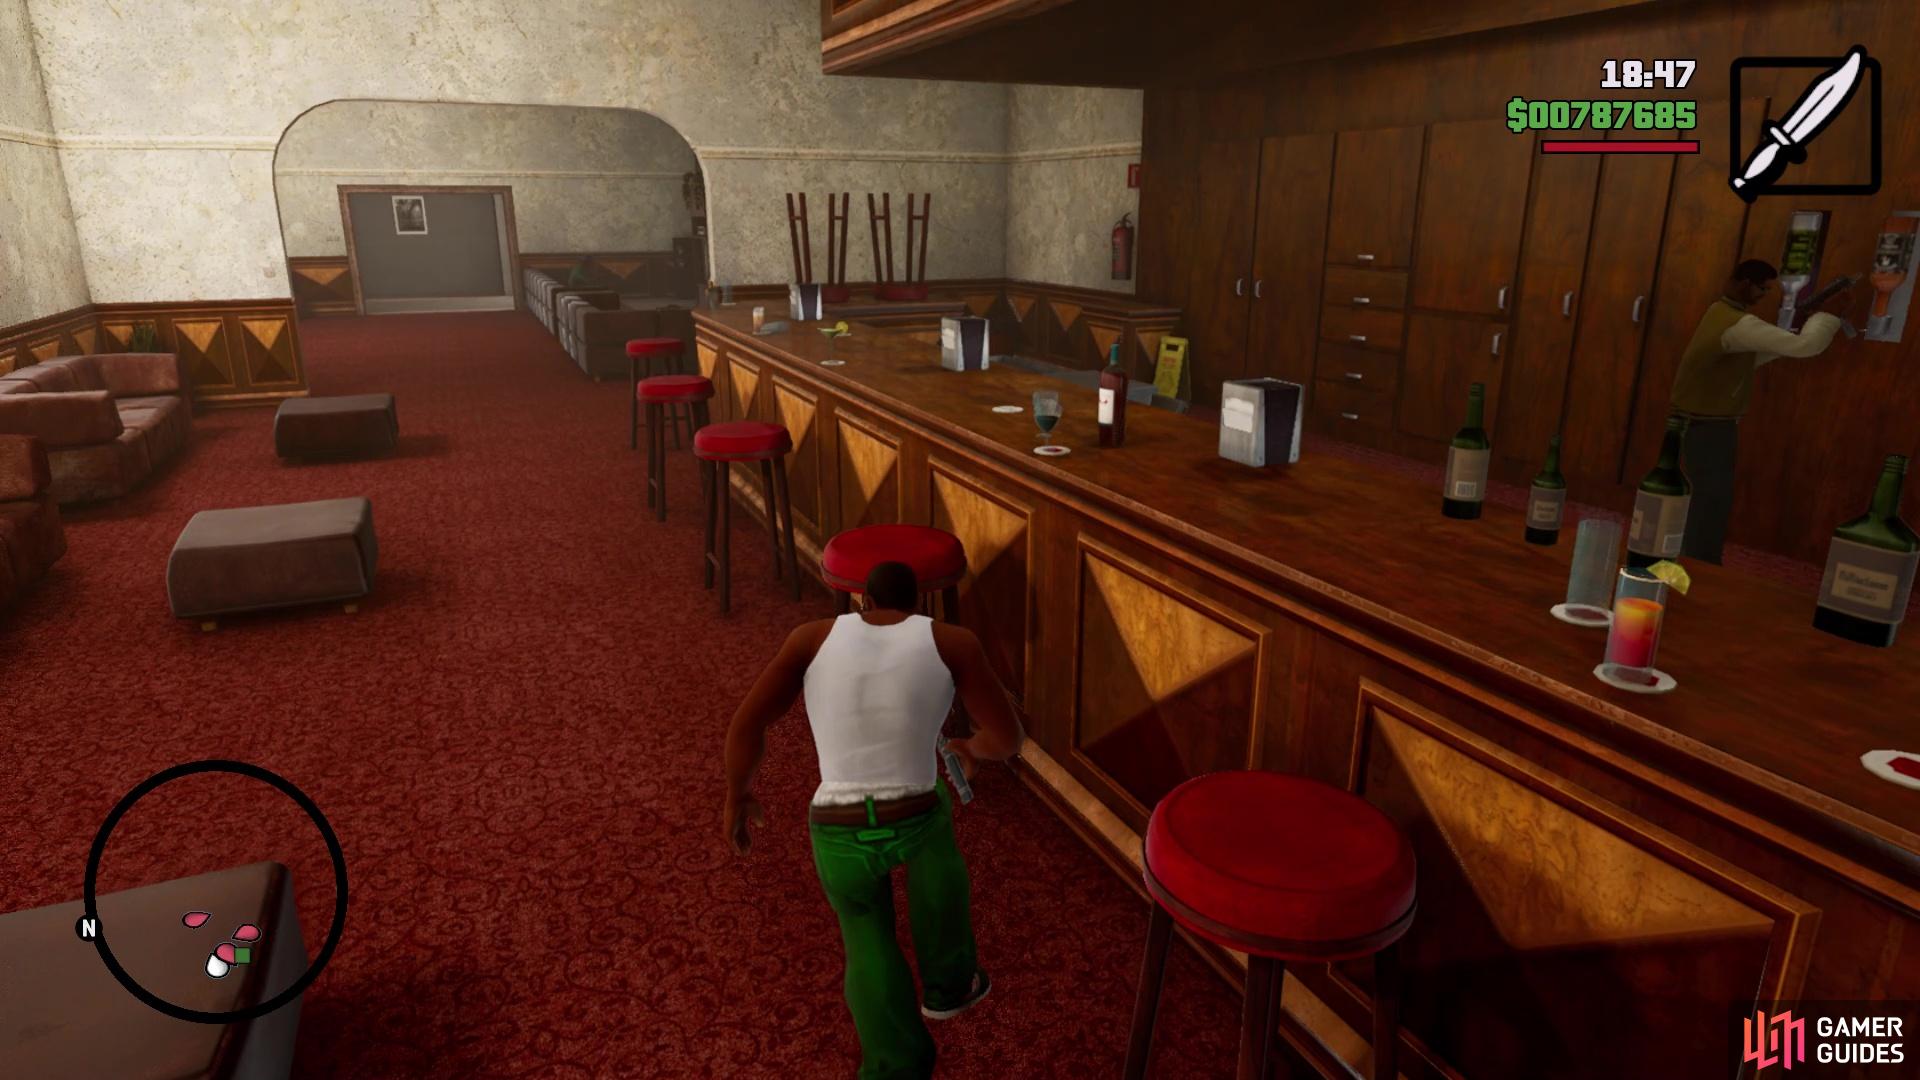 It's better to just sneak past the enemies in the bar area